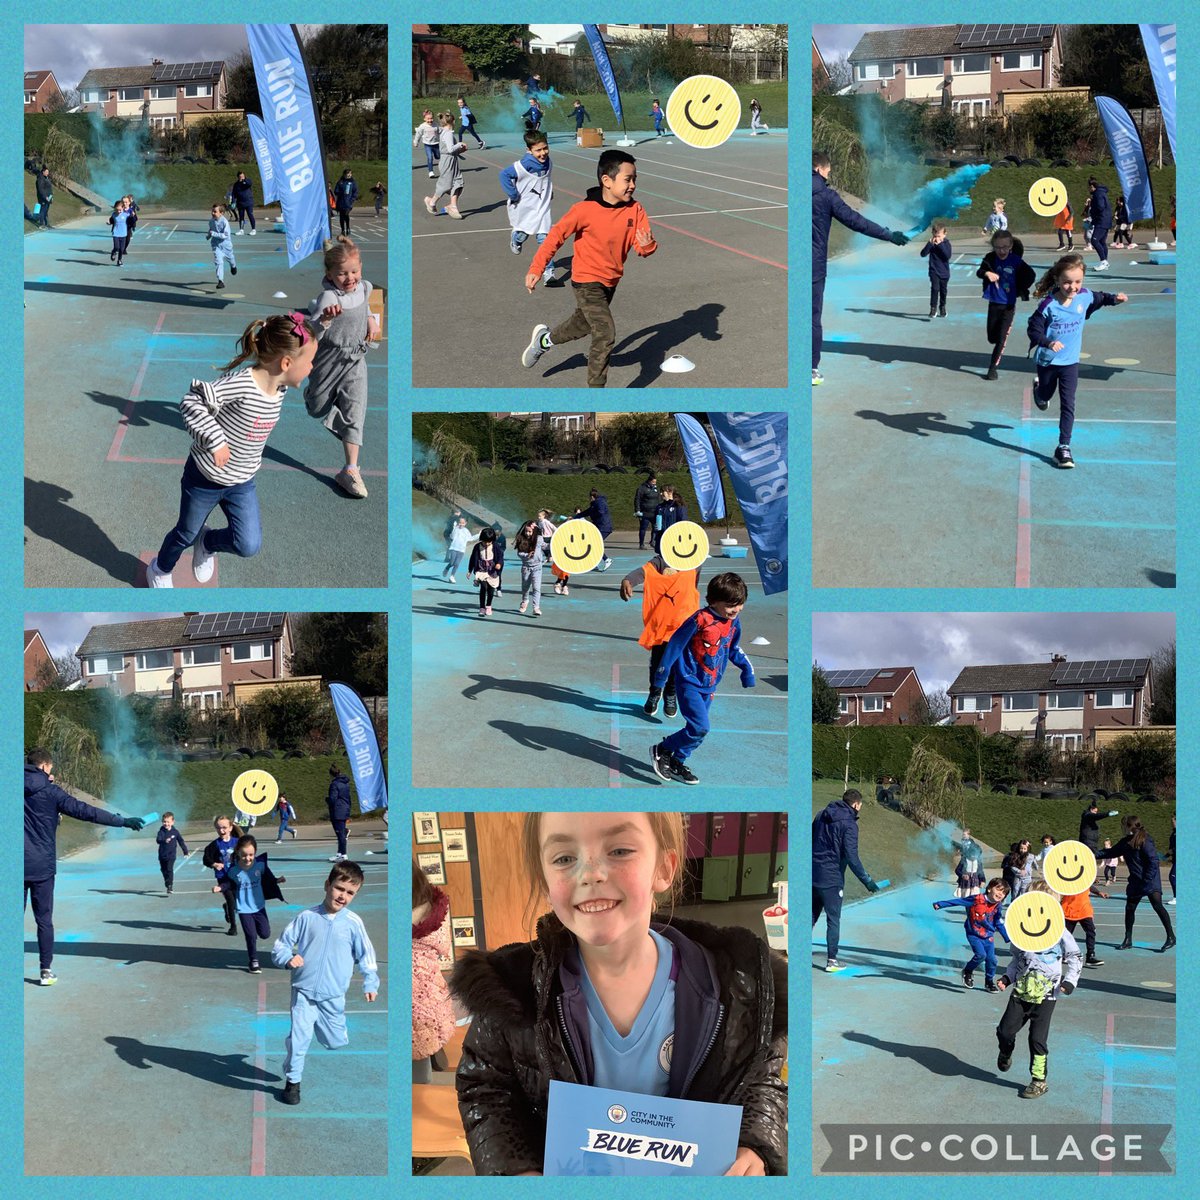 Class 3 were definitely looking blue BUT not feeling blue at the fabulous #BlueRun2022 💙 laughs and smiles all around 😆 @citctweets #sjsbPE @StJosephStBede